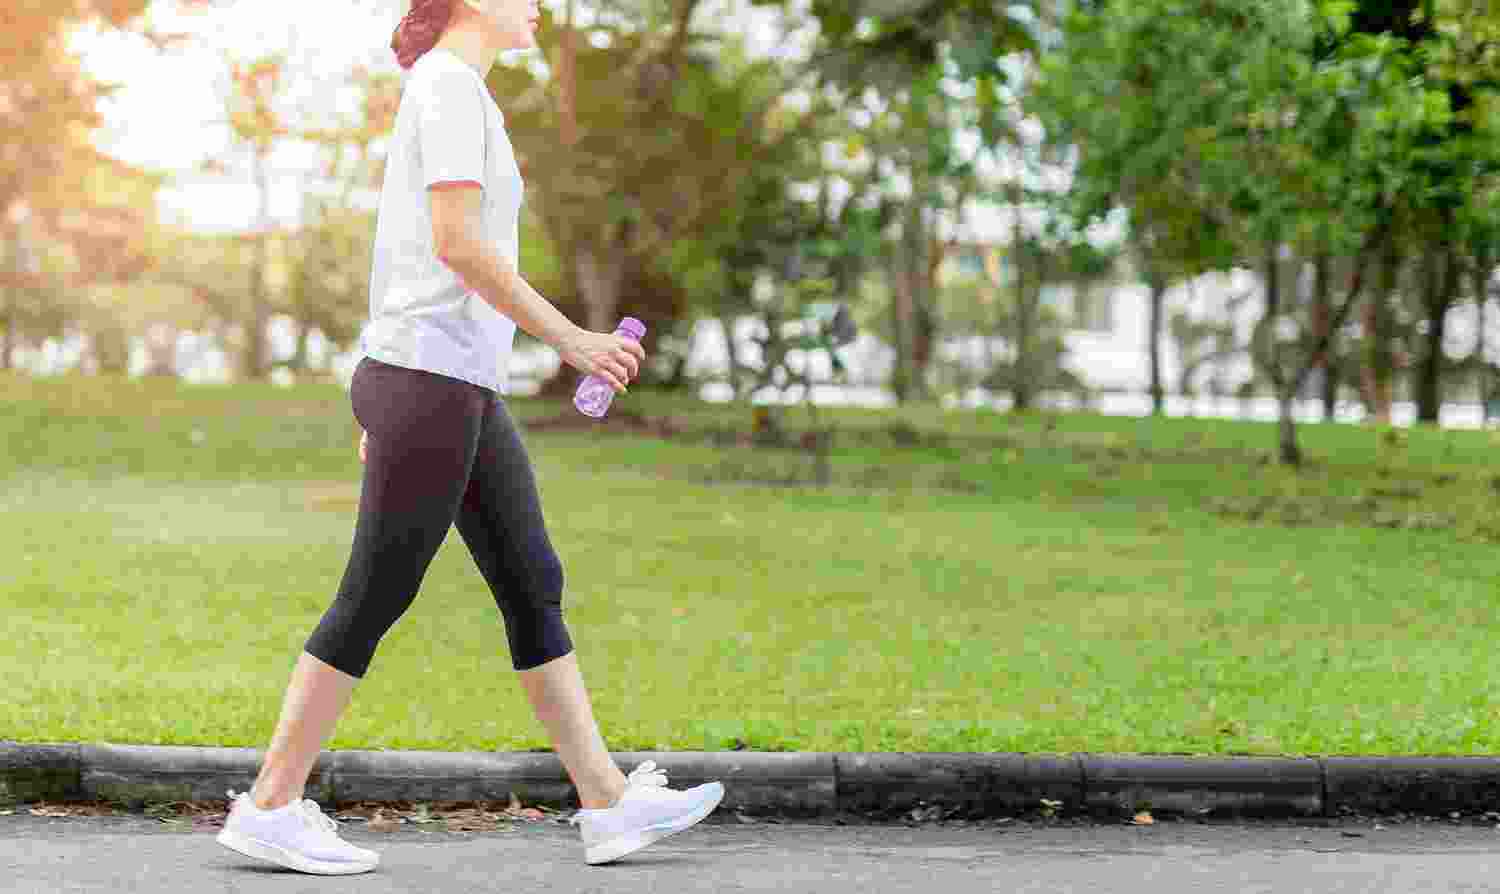 Walking can prevent recurring lower back pain